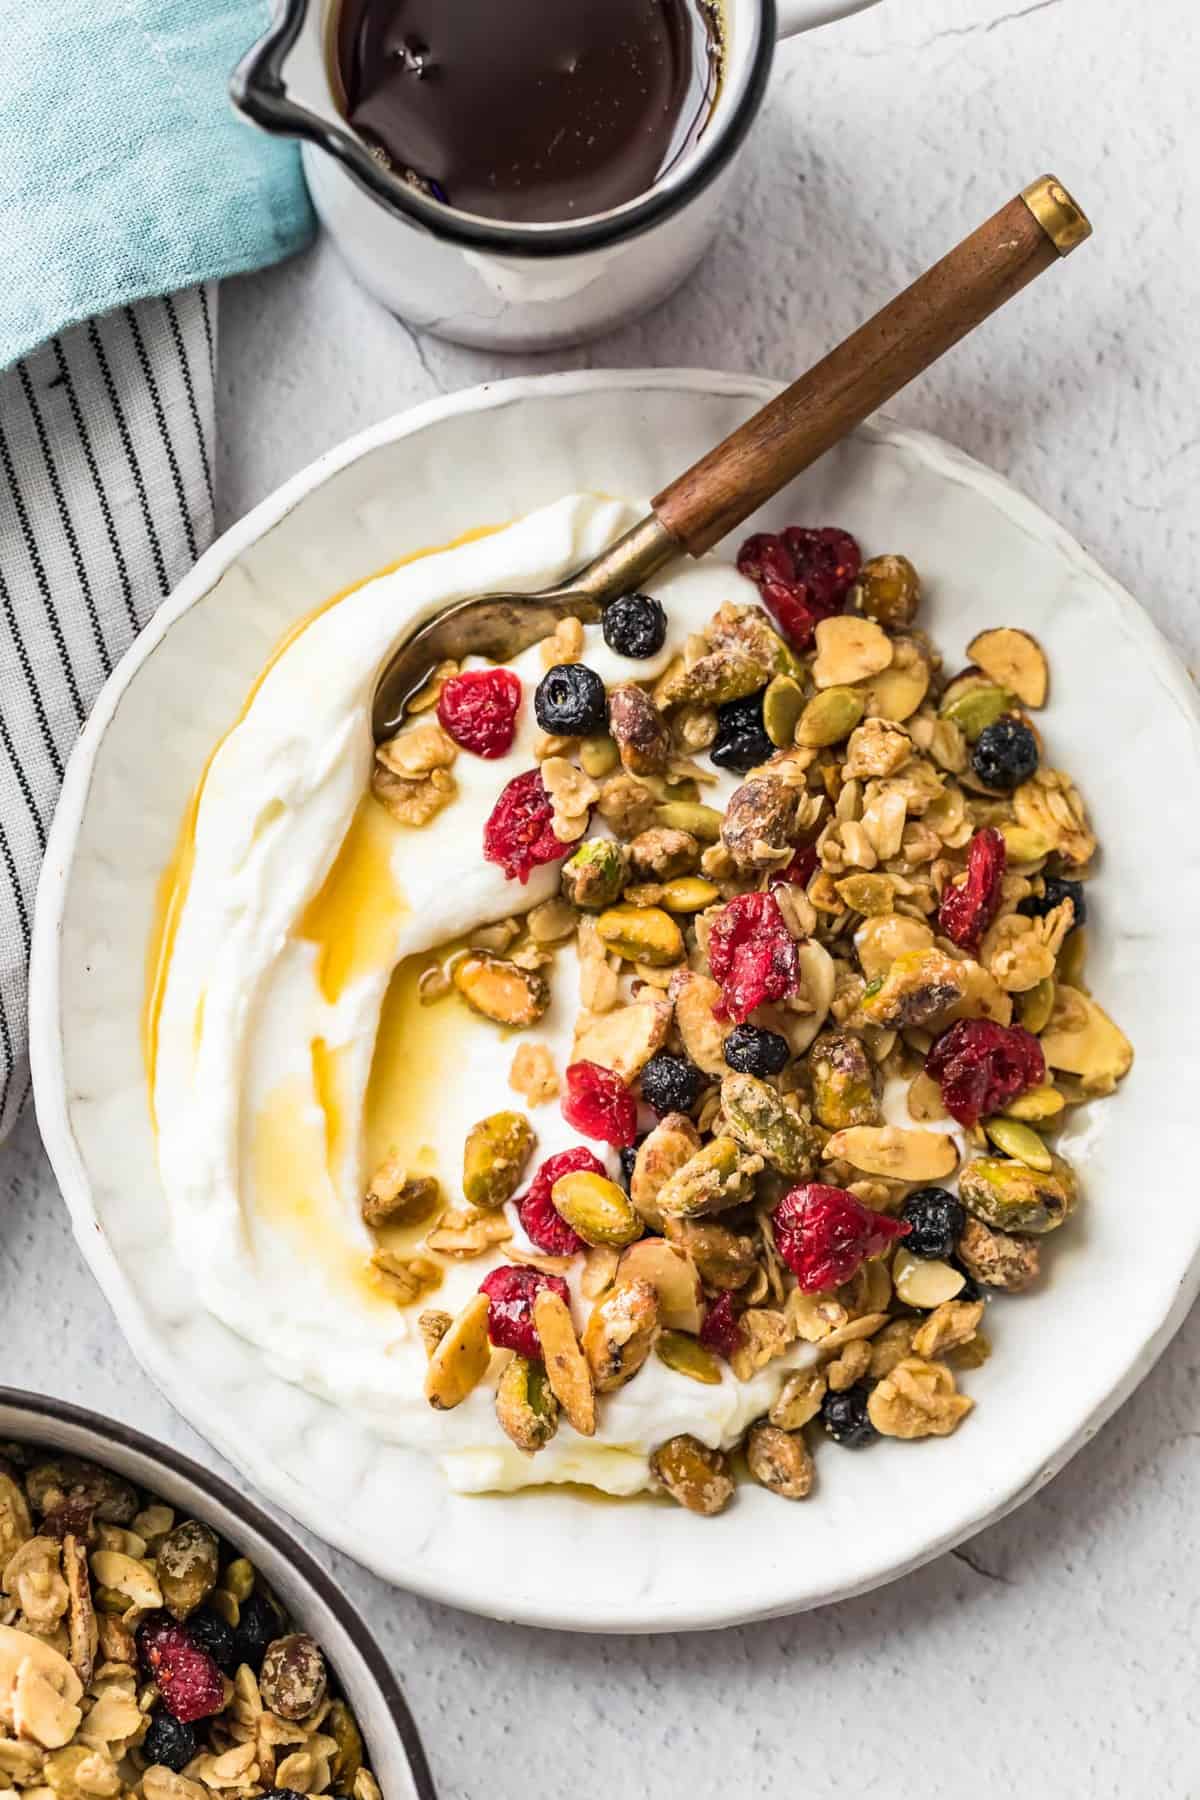 Top shot of granola served in a bowl at a breakfast table